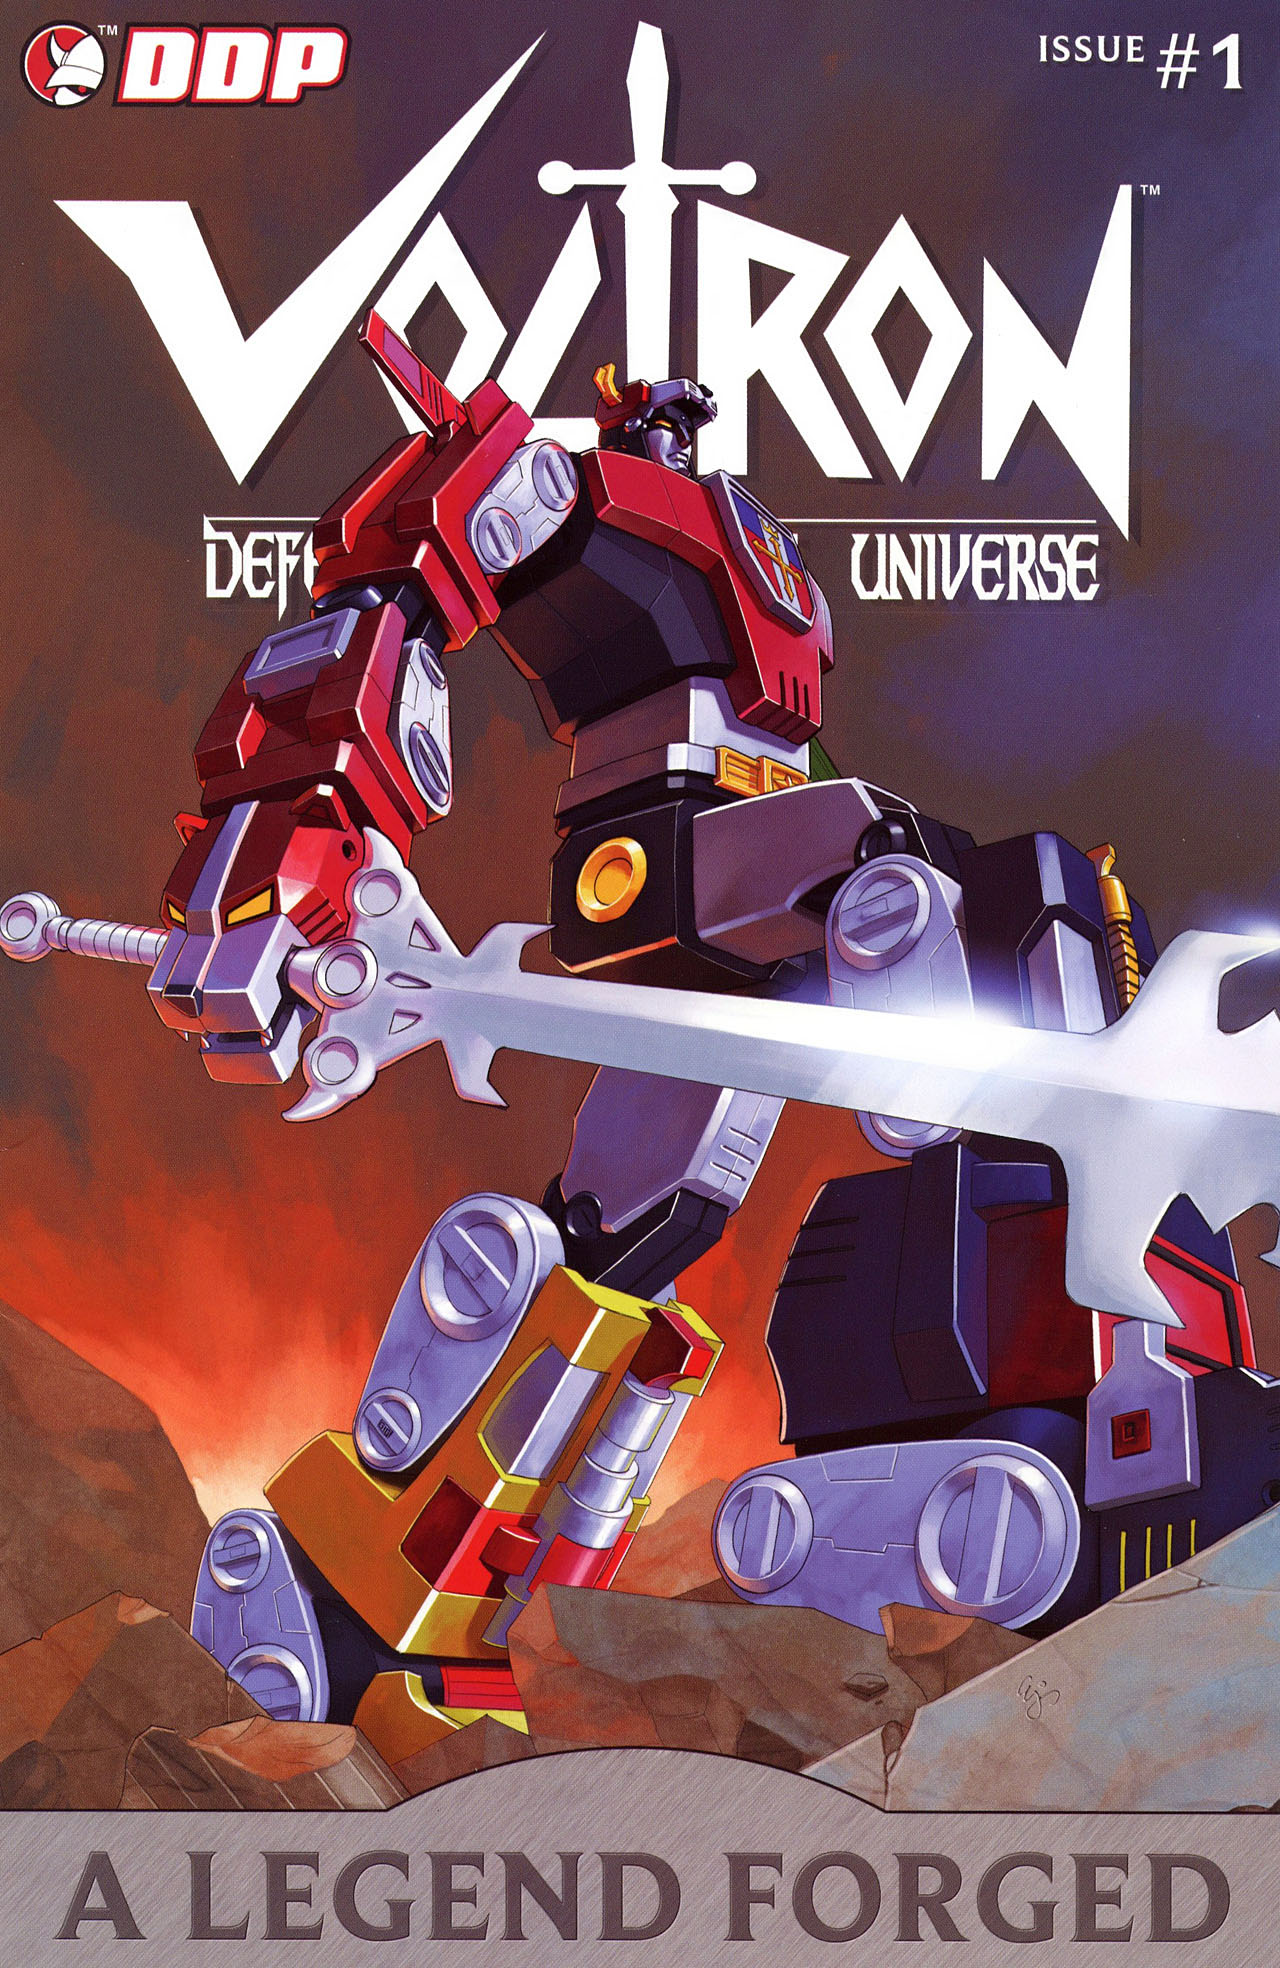 Read online Voltron: A Legend Forged comic -  Issue #1 - 4